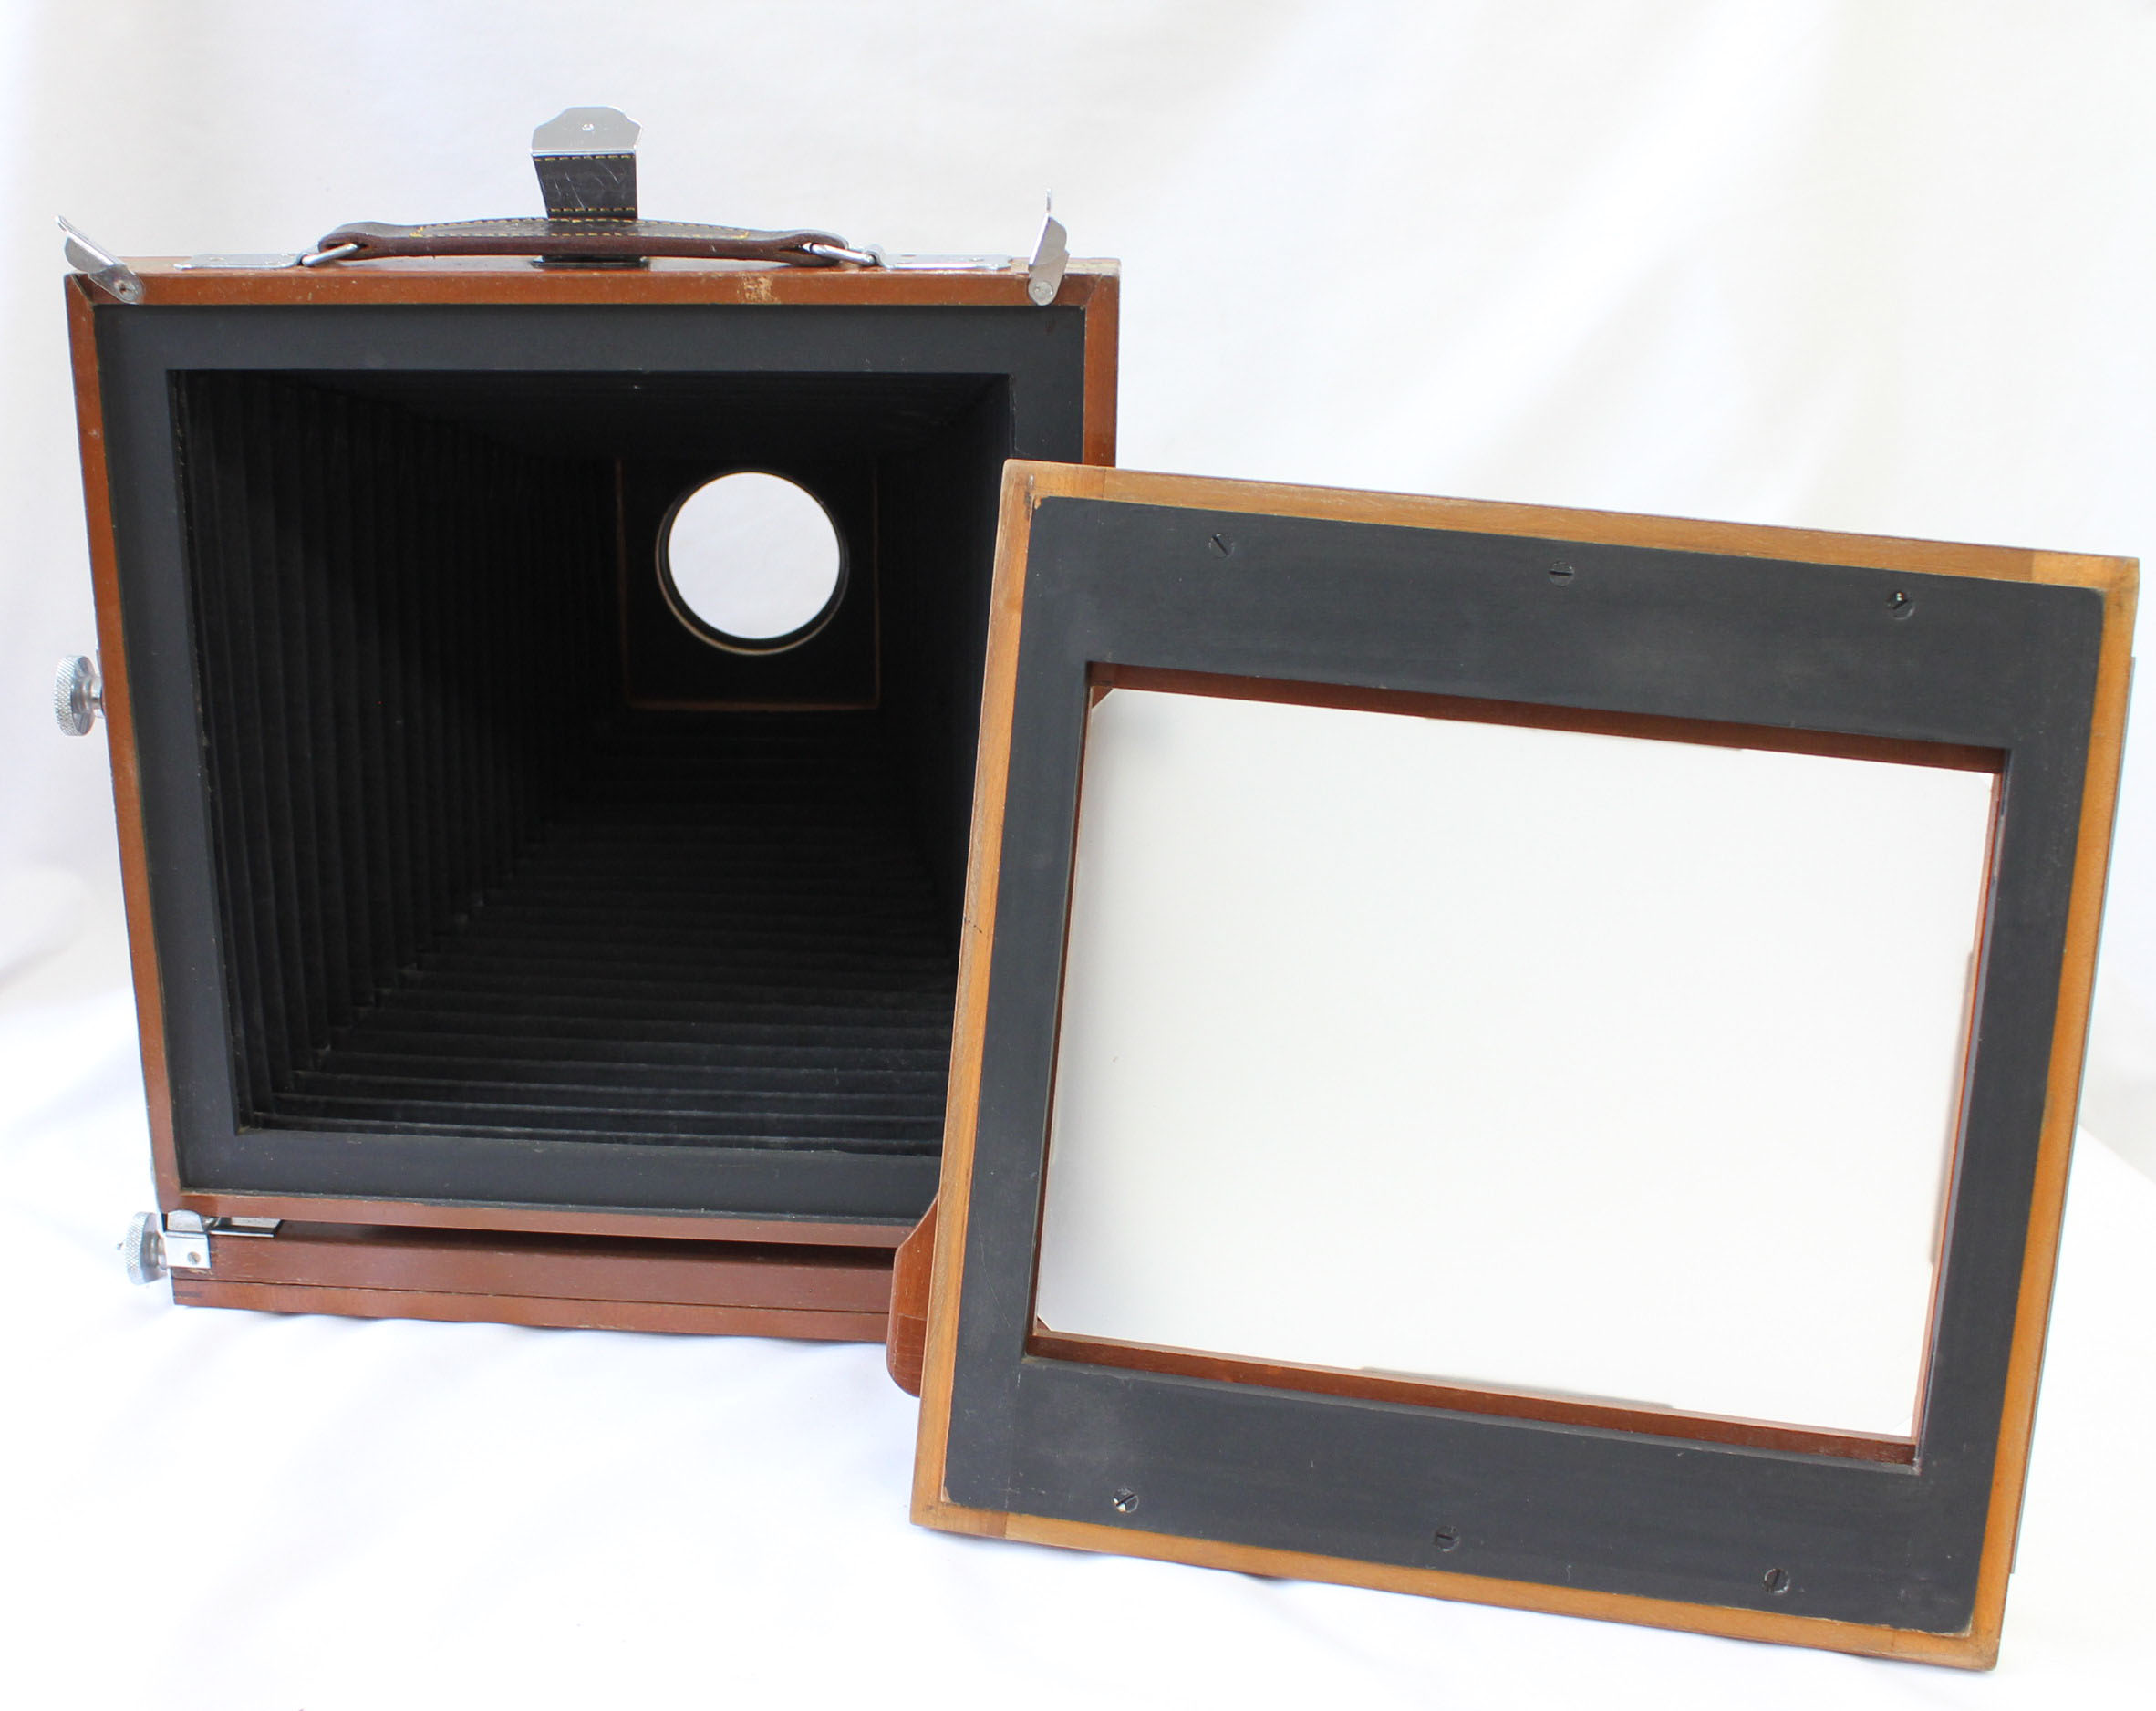  Tachihara Hope A STF 6 1/2x8 1/2 6.5x8.5inch 165x216mm Wood Field Camera with 8 Cut Film Holder from Japan Photo 9